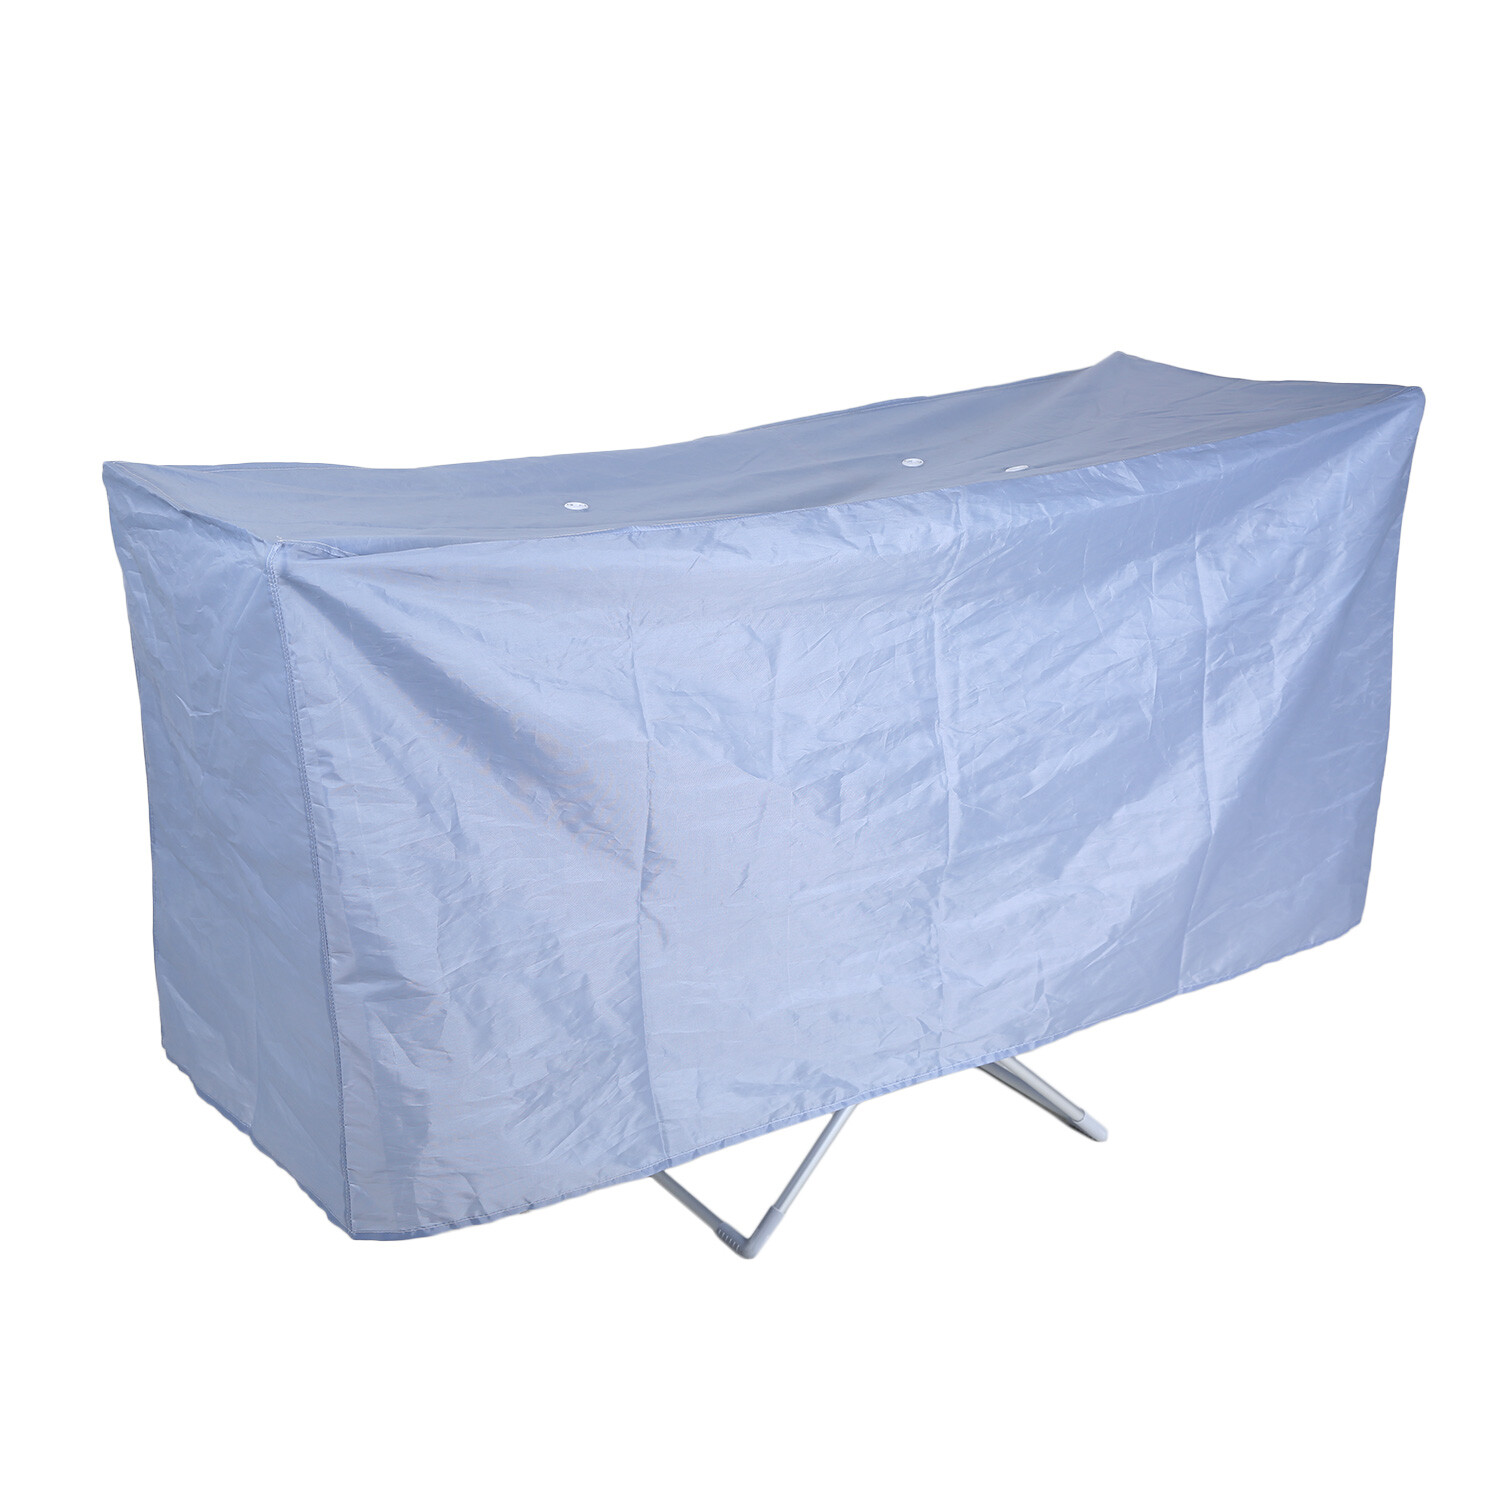 Winged Heated Airer Cover - Blue Image 1